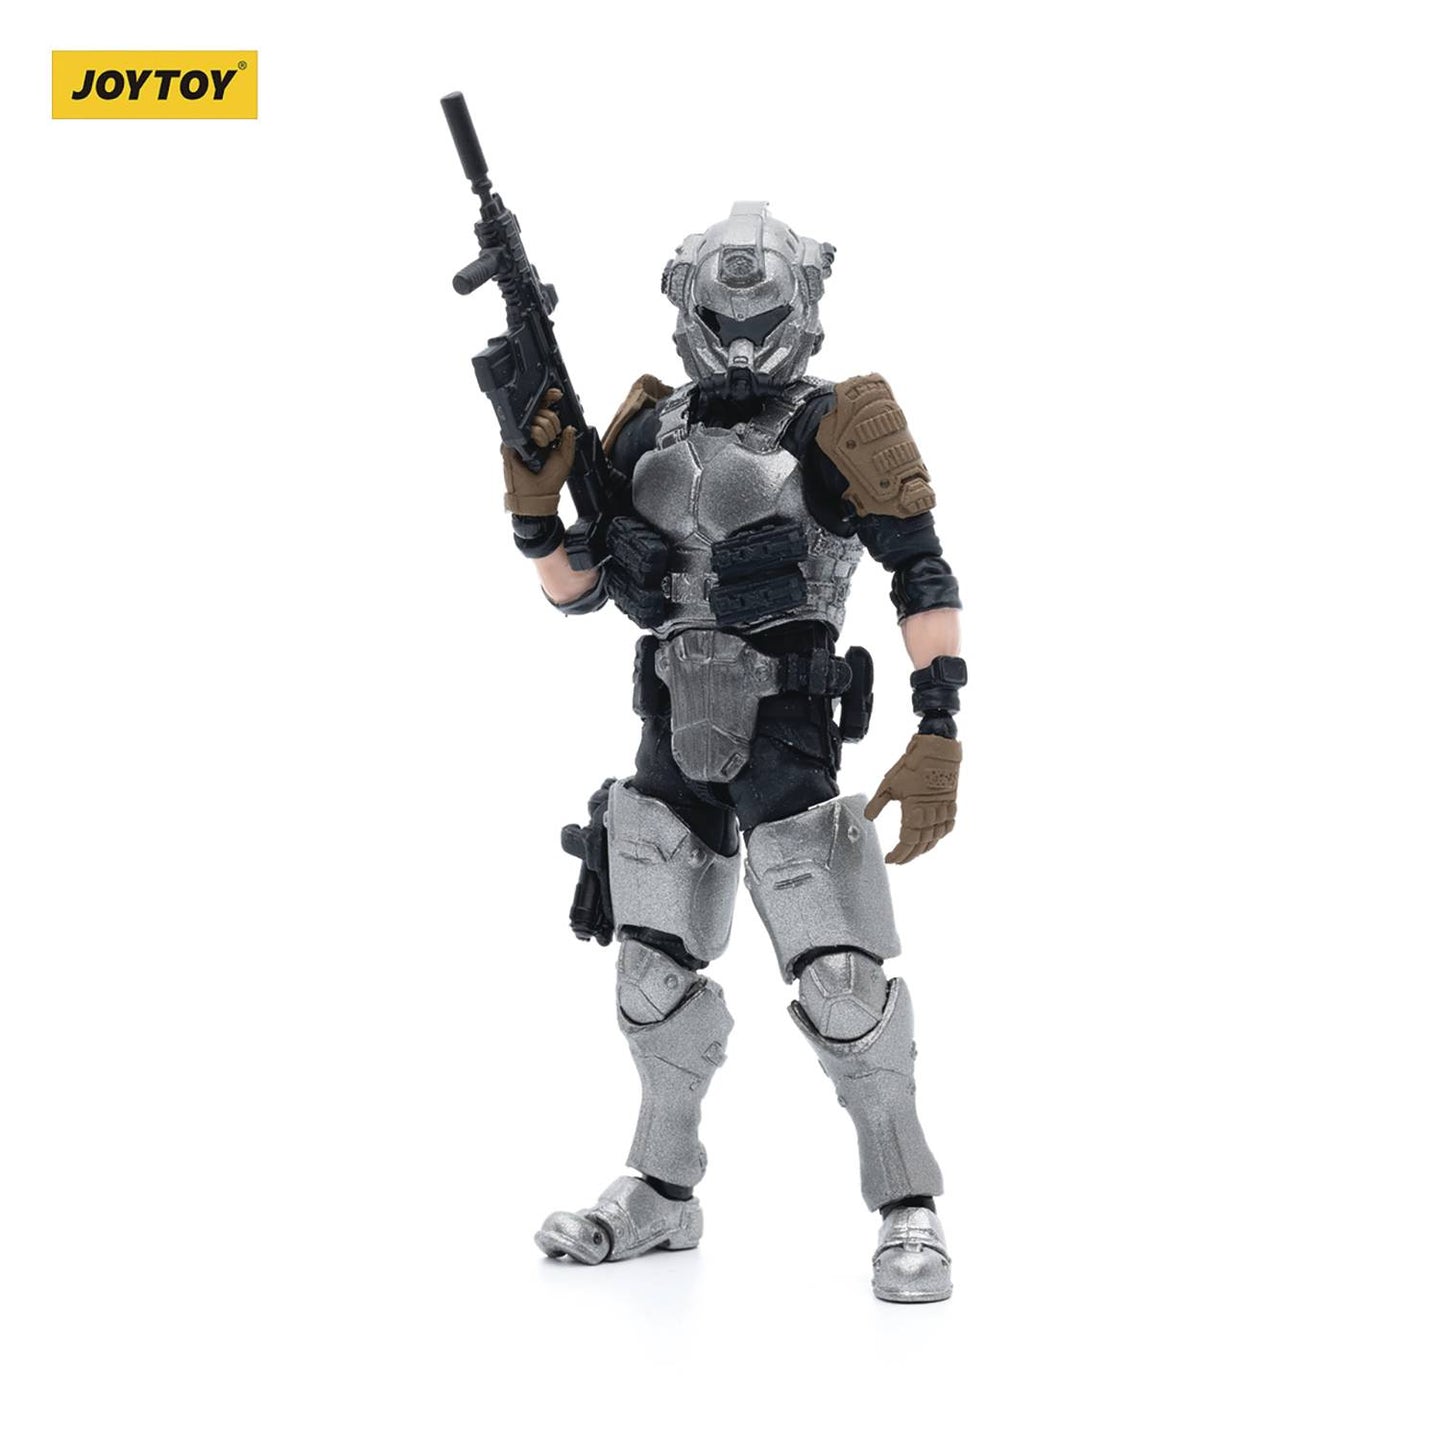 JOYTOY YEARLY ARMY BUILDER PROMOTION PACK FIGURE 04 1/18 FIG